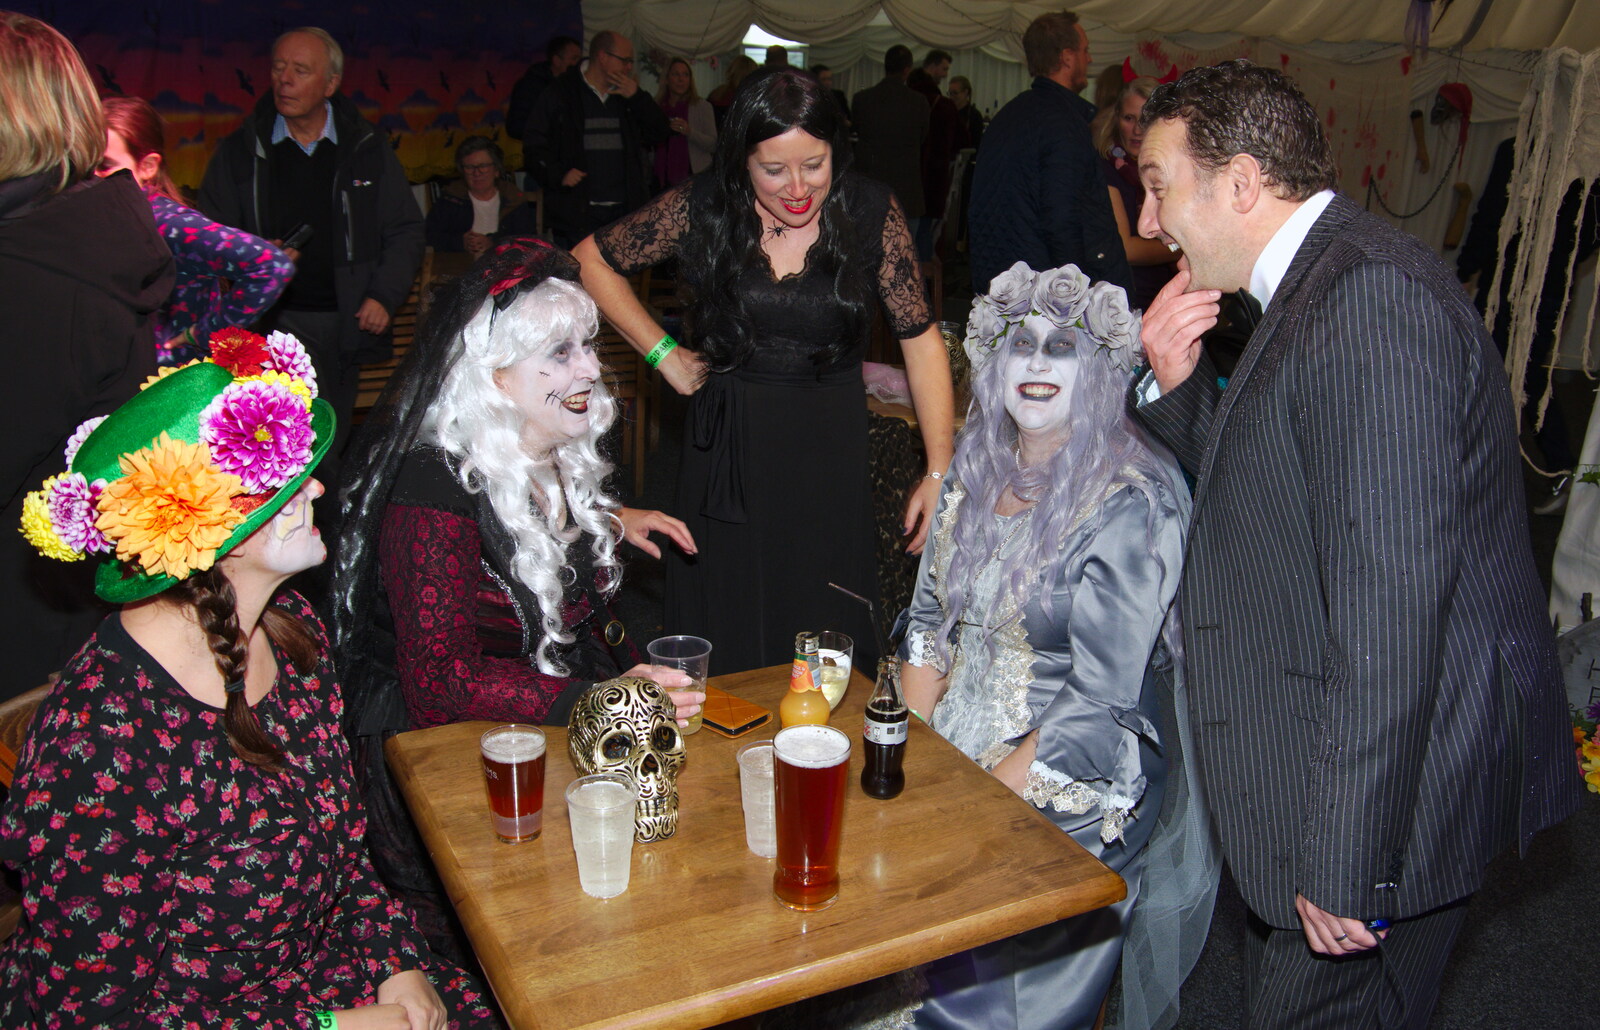 Clive turns up as Gomez Addams from Day of the Dead Party at the Oaksmere, Brome, Suffolk - 2nd November 2019